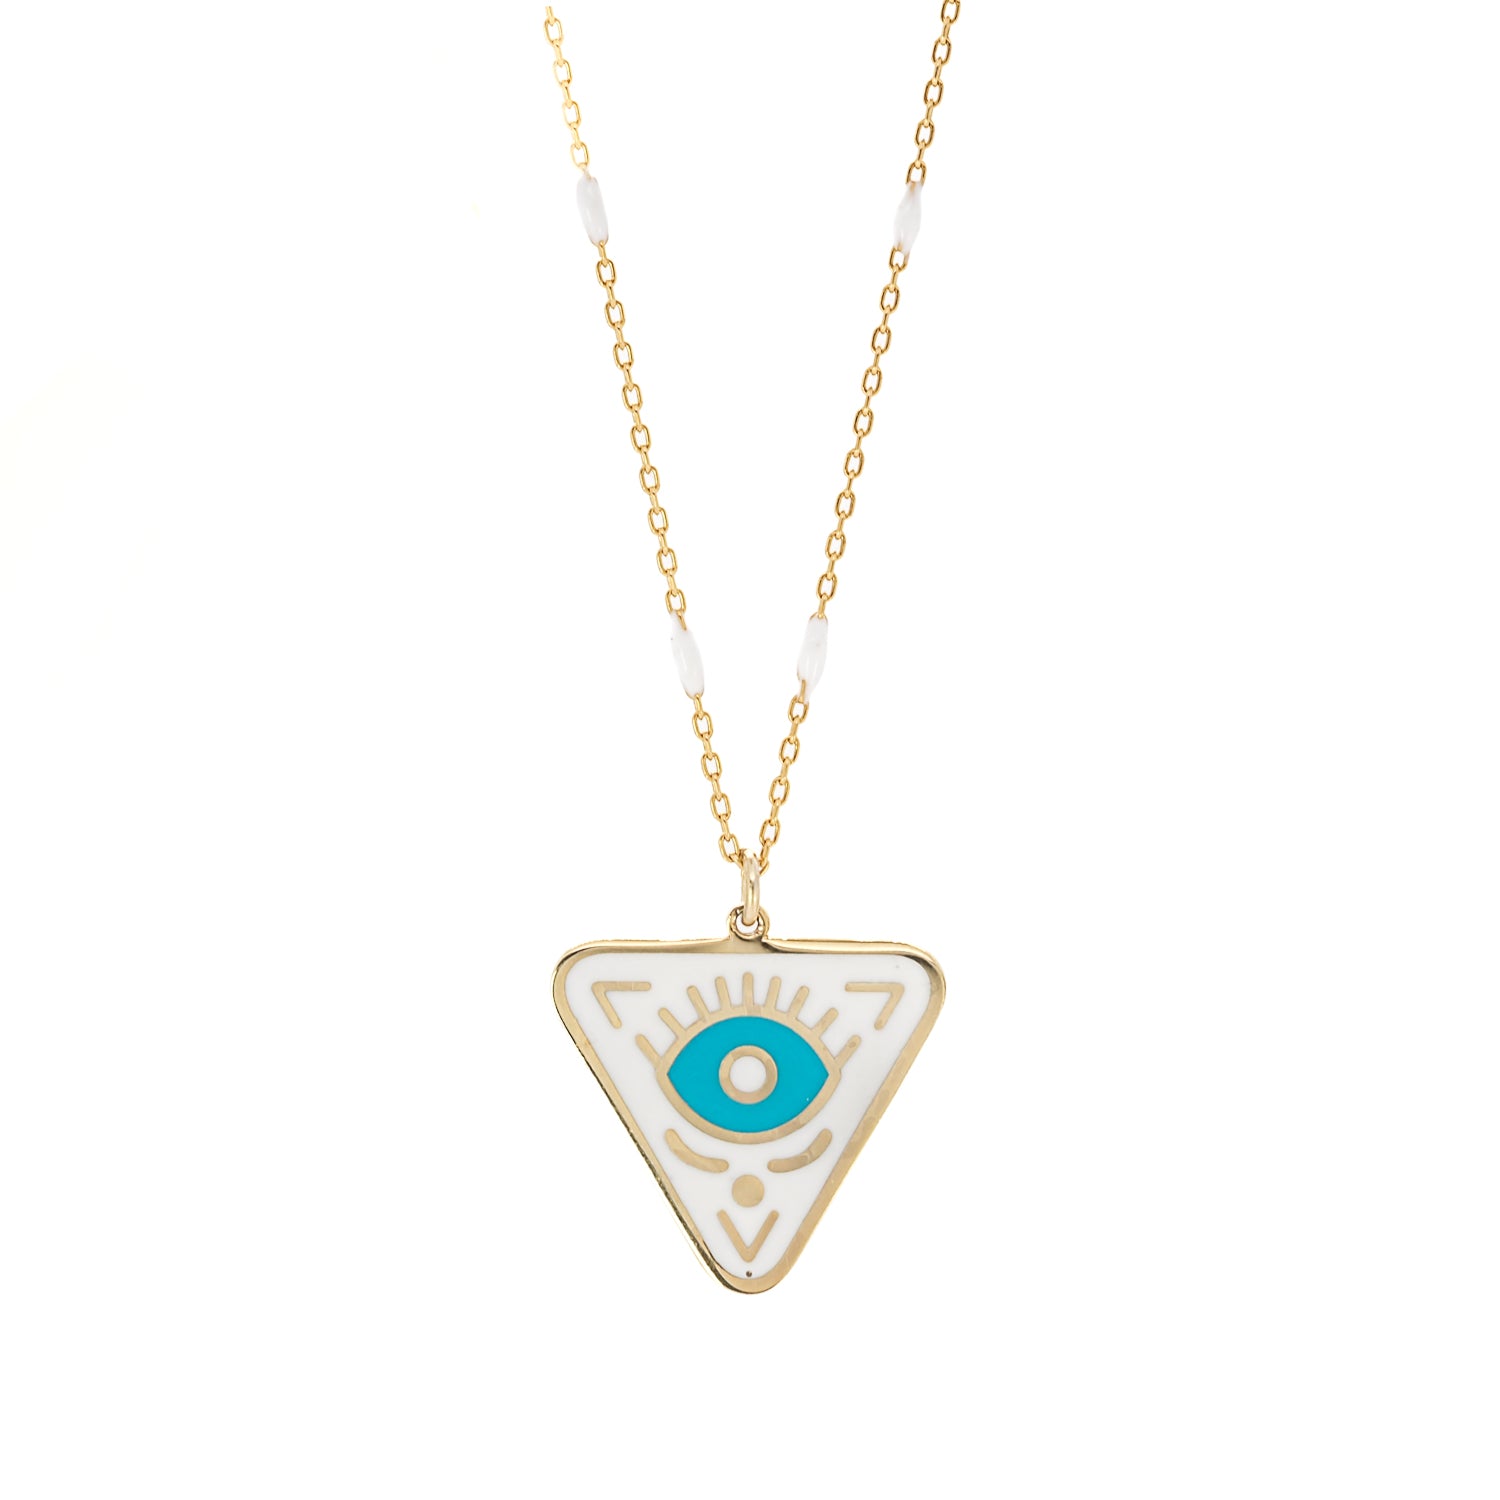 White and Turquoise Enamel Pendant - A blend of tranquility and beauty.